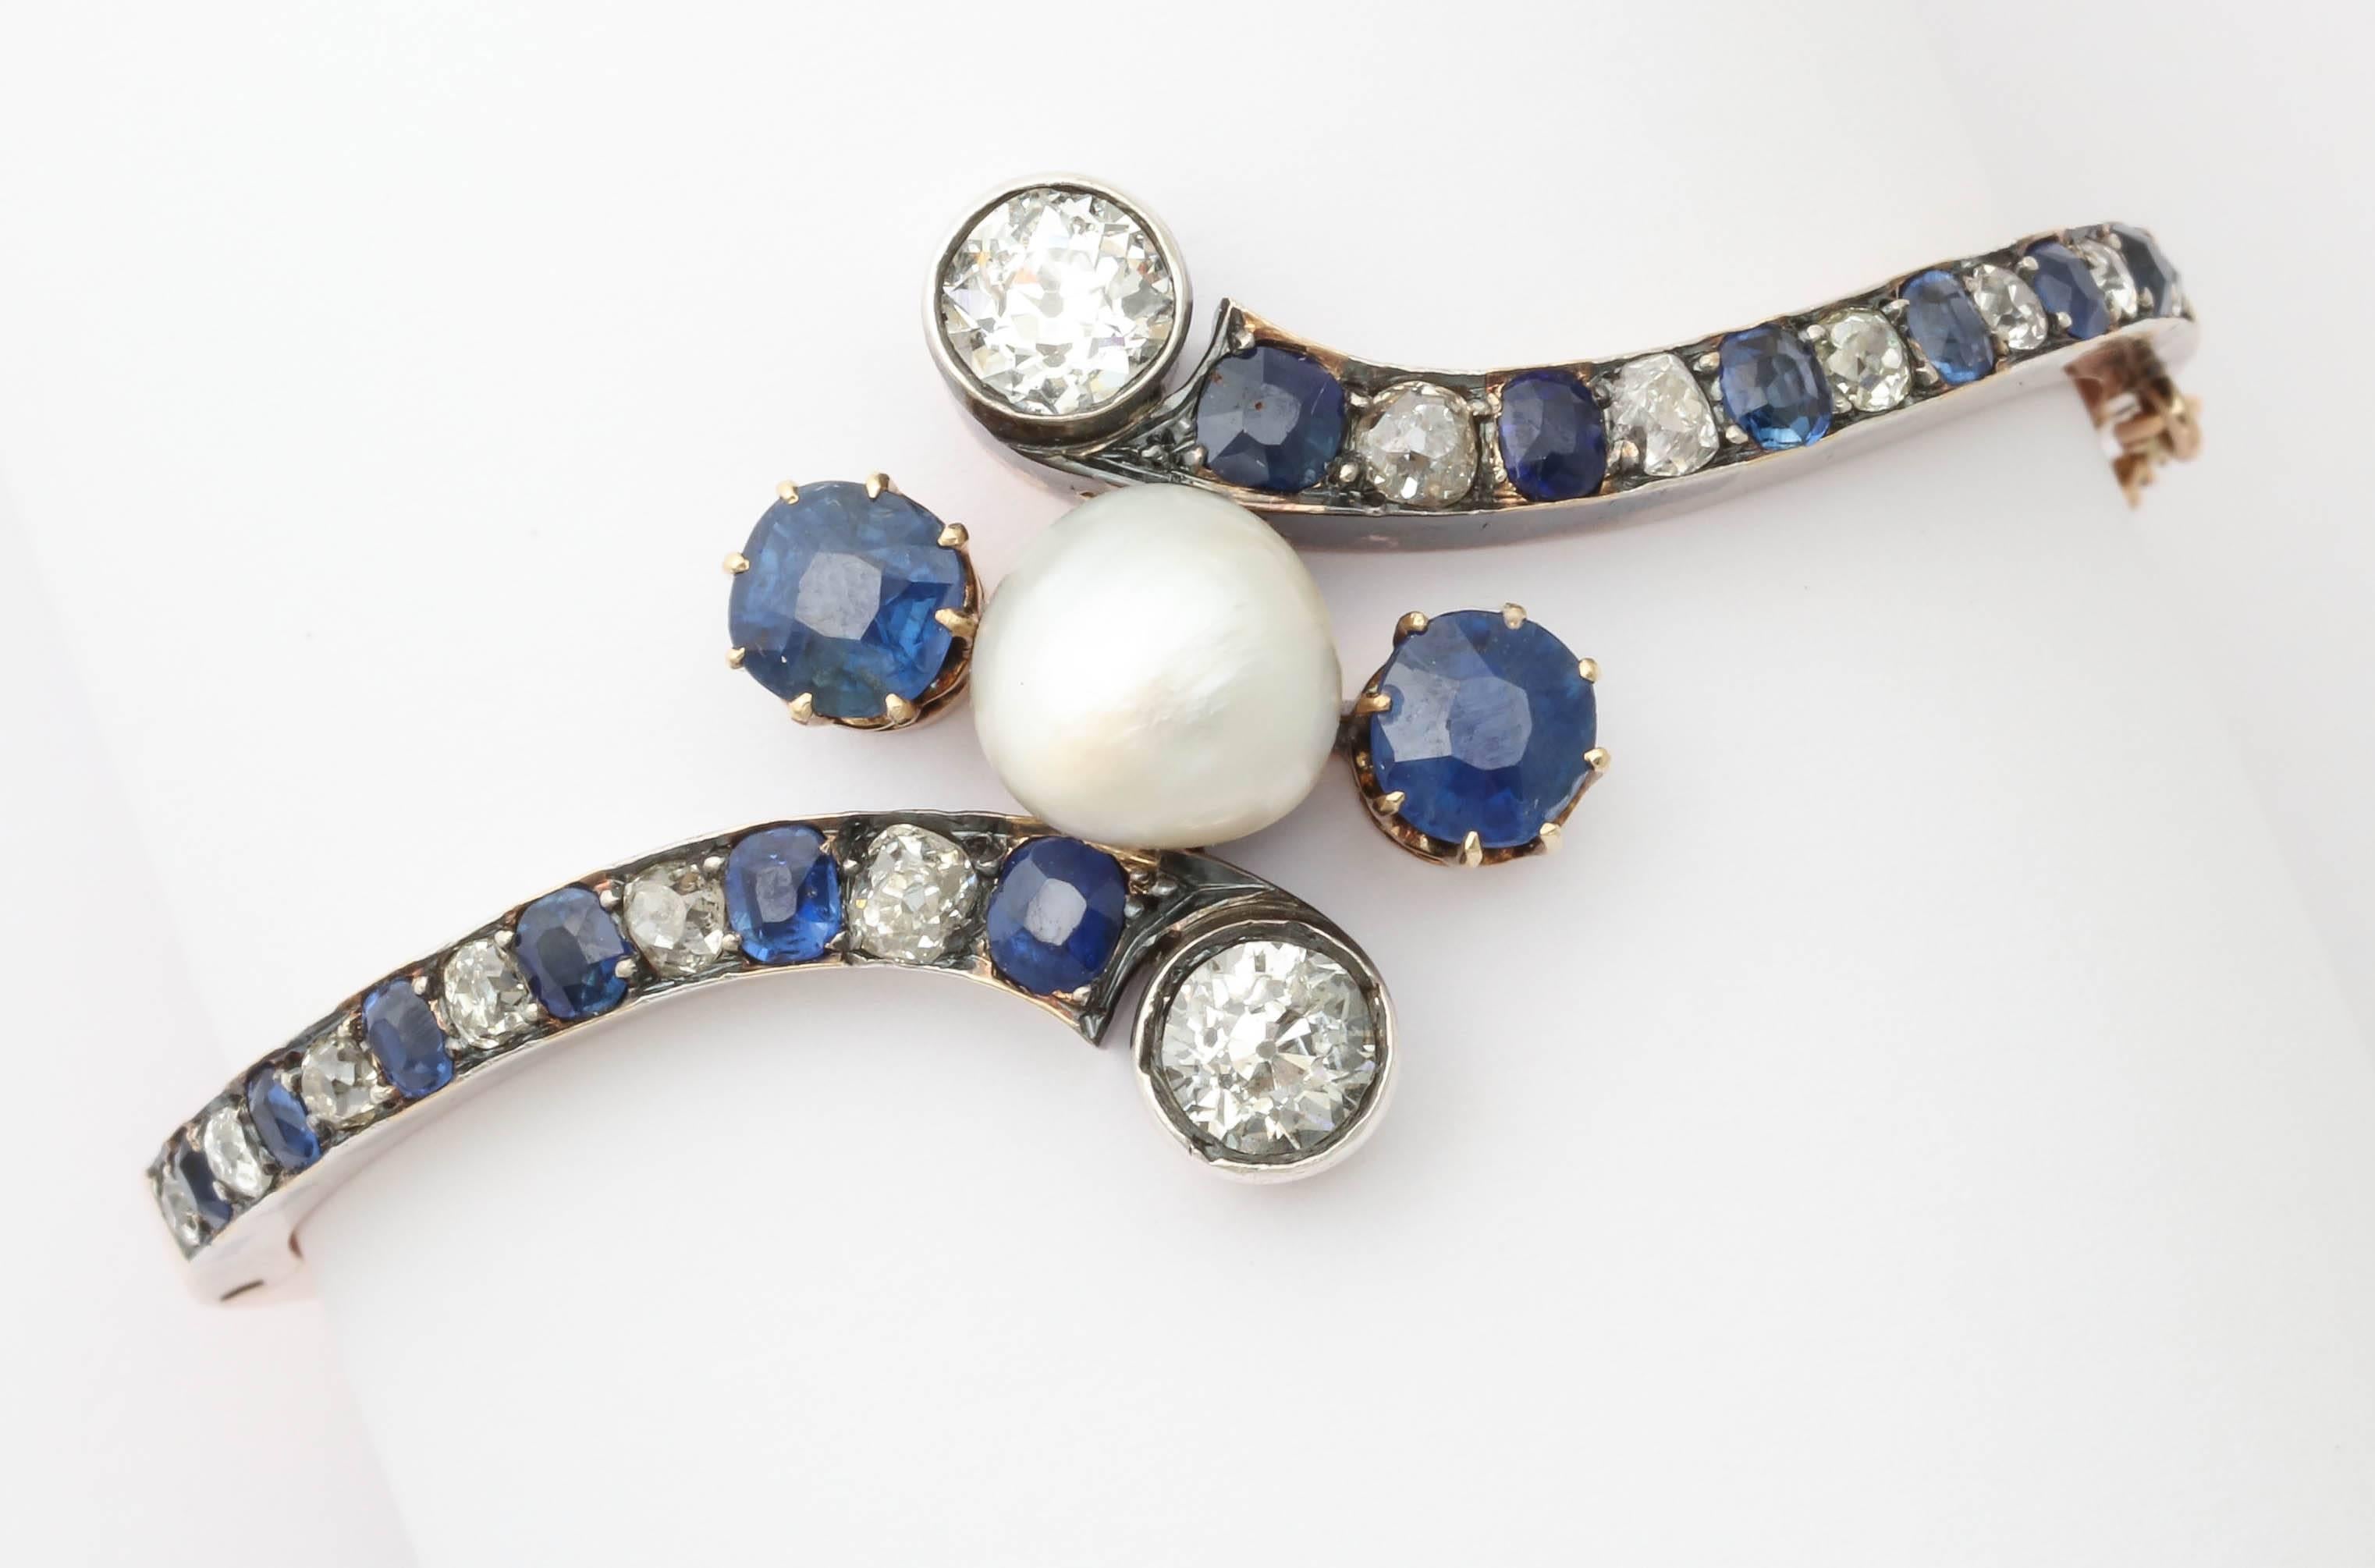 A fabulous bracelet in its original box. A large natural pearl (approx. 9mm) is set in the center with two Old European cut diamonds weighing approximately 1.2ctw and two sapphires weighing approximately 2.1ctw set around it. Set into the bracelet